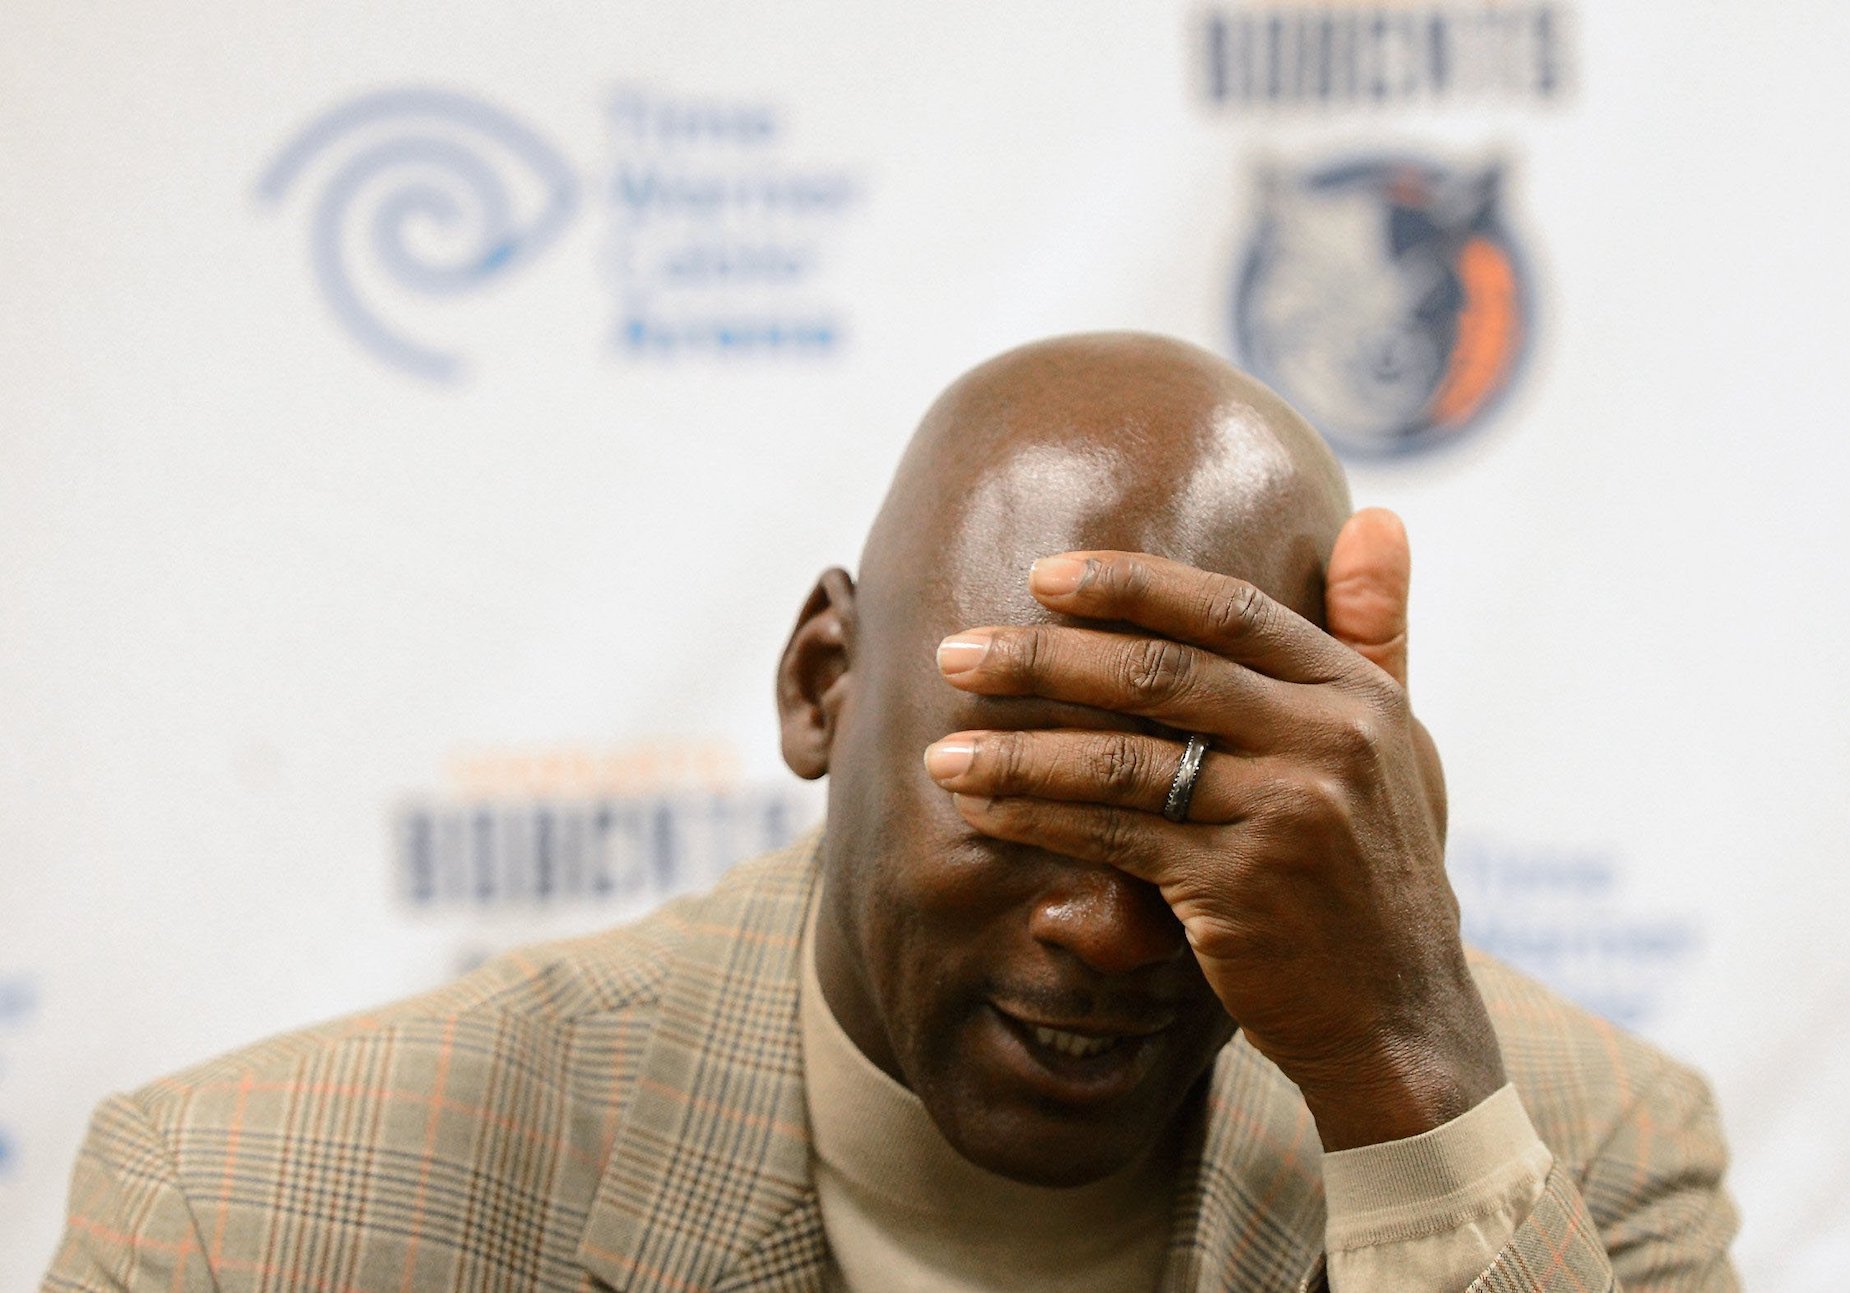 Michael Jordan reacts during a 2013 press conference.